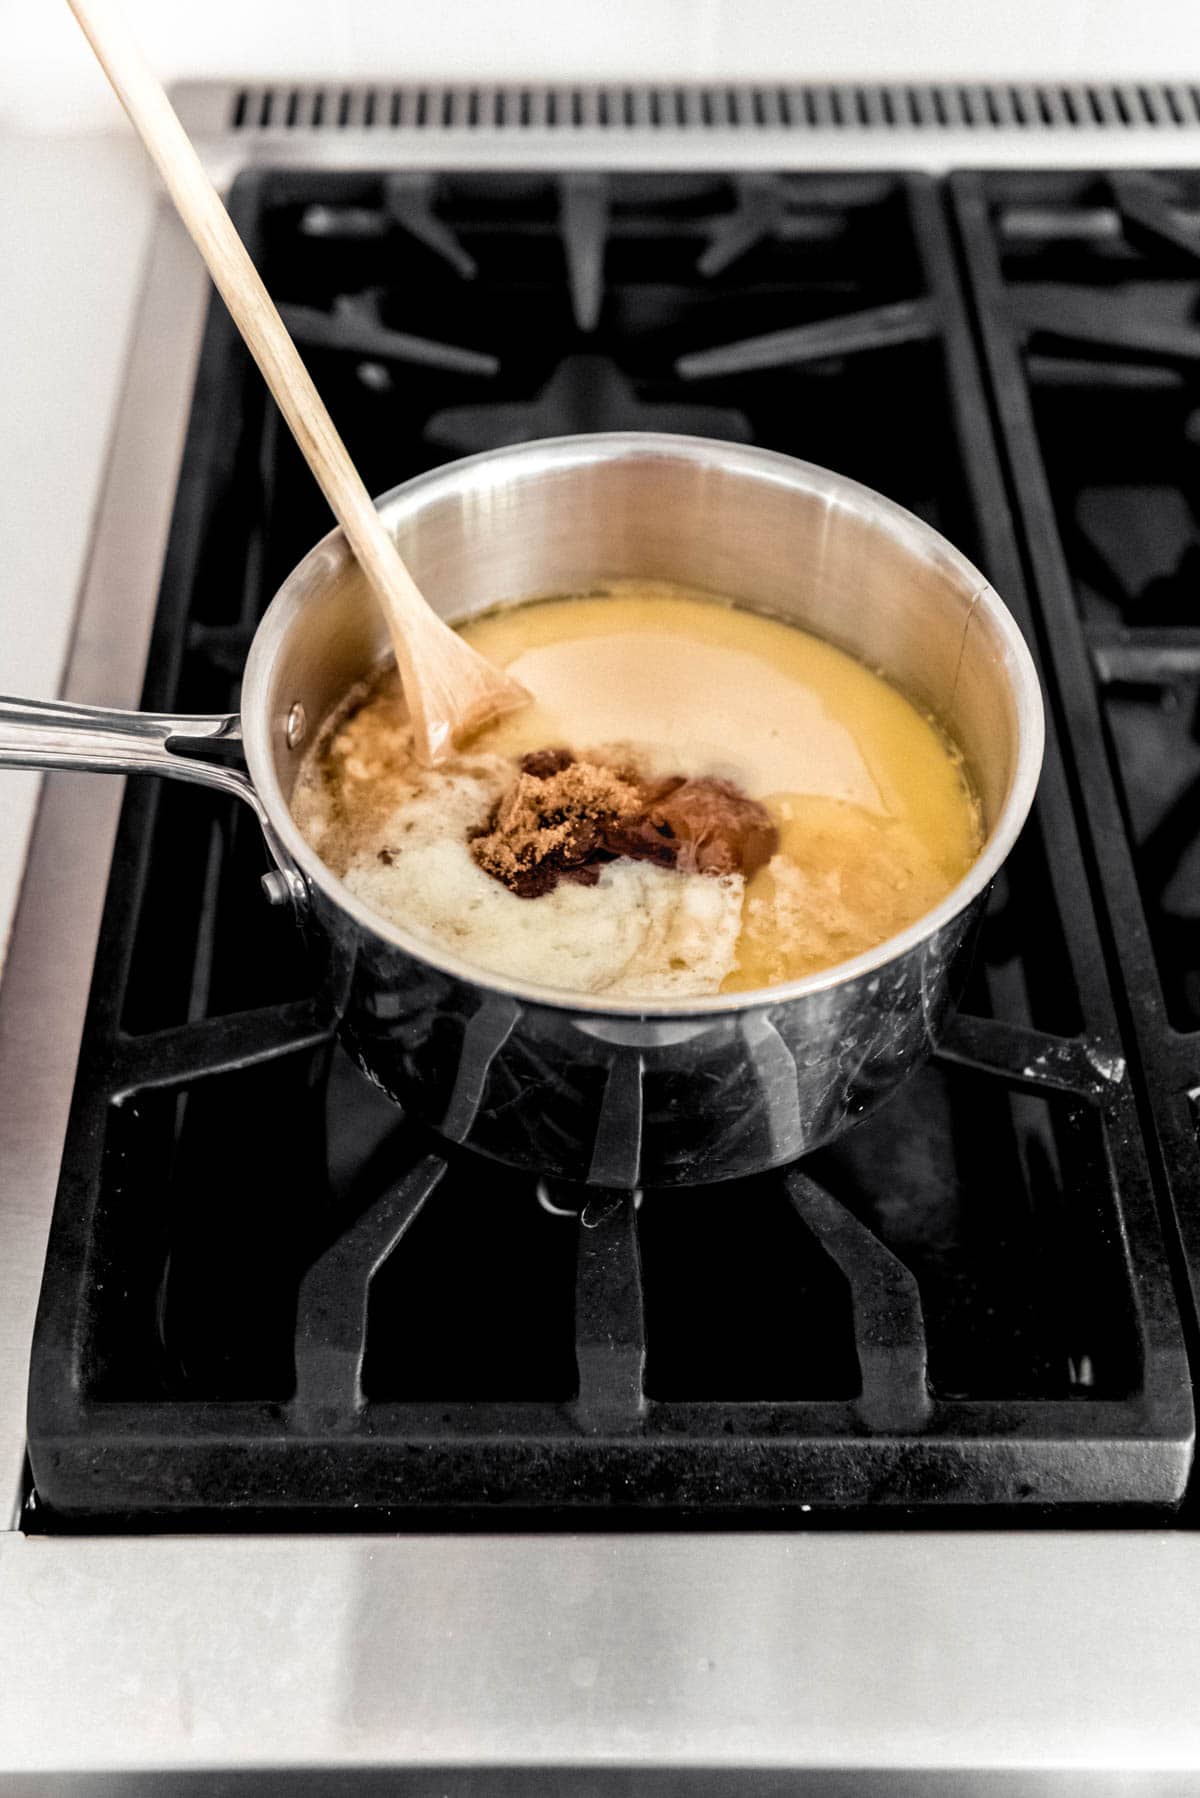 Adding sweetened condensed milk and brown sugar to melted butter in a saucepan on the stove.